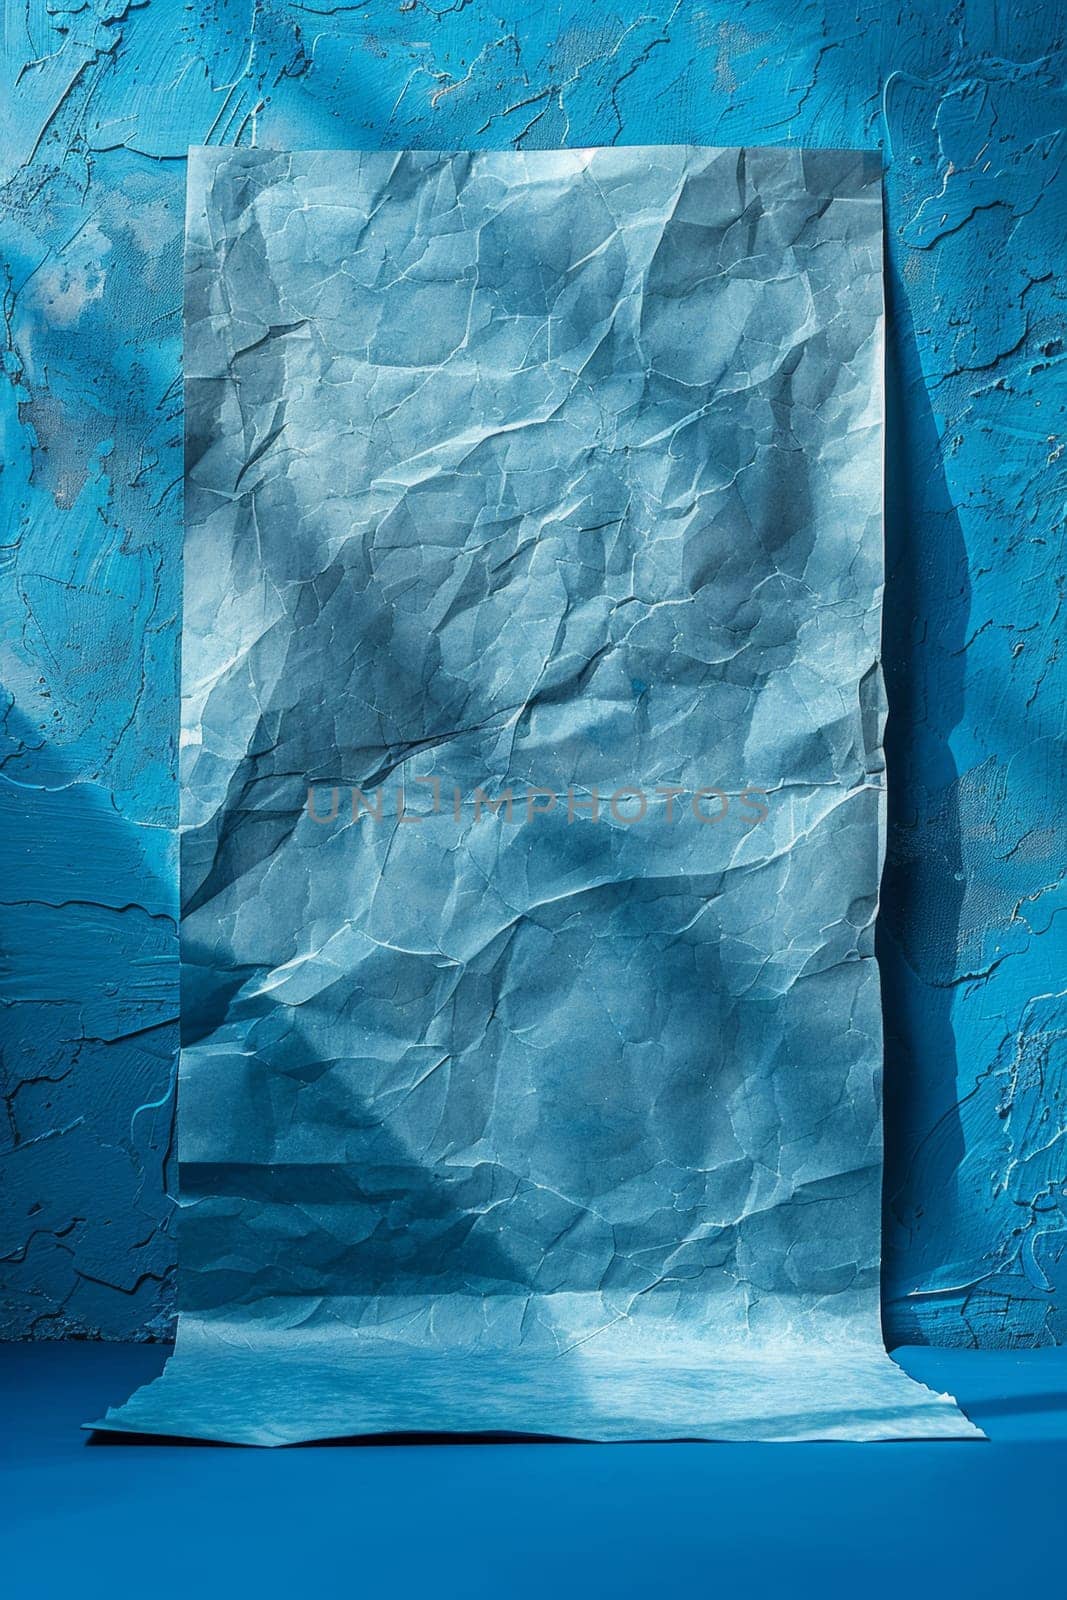 A piece of paper is sitting on a blue wall